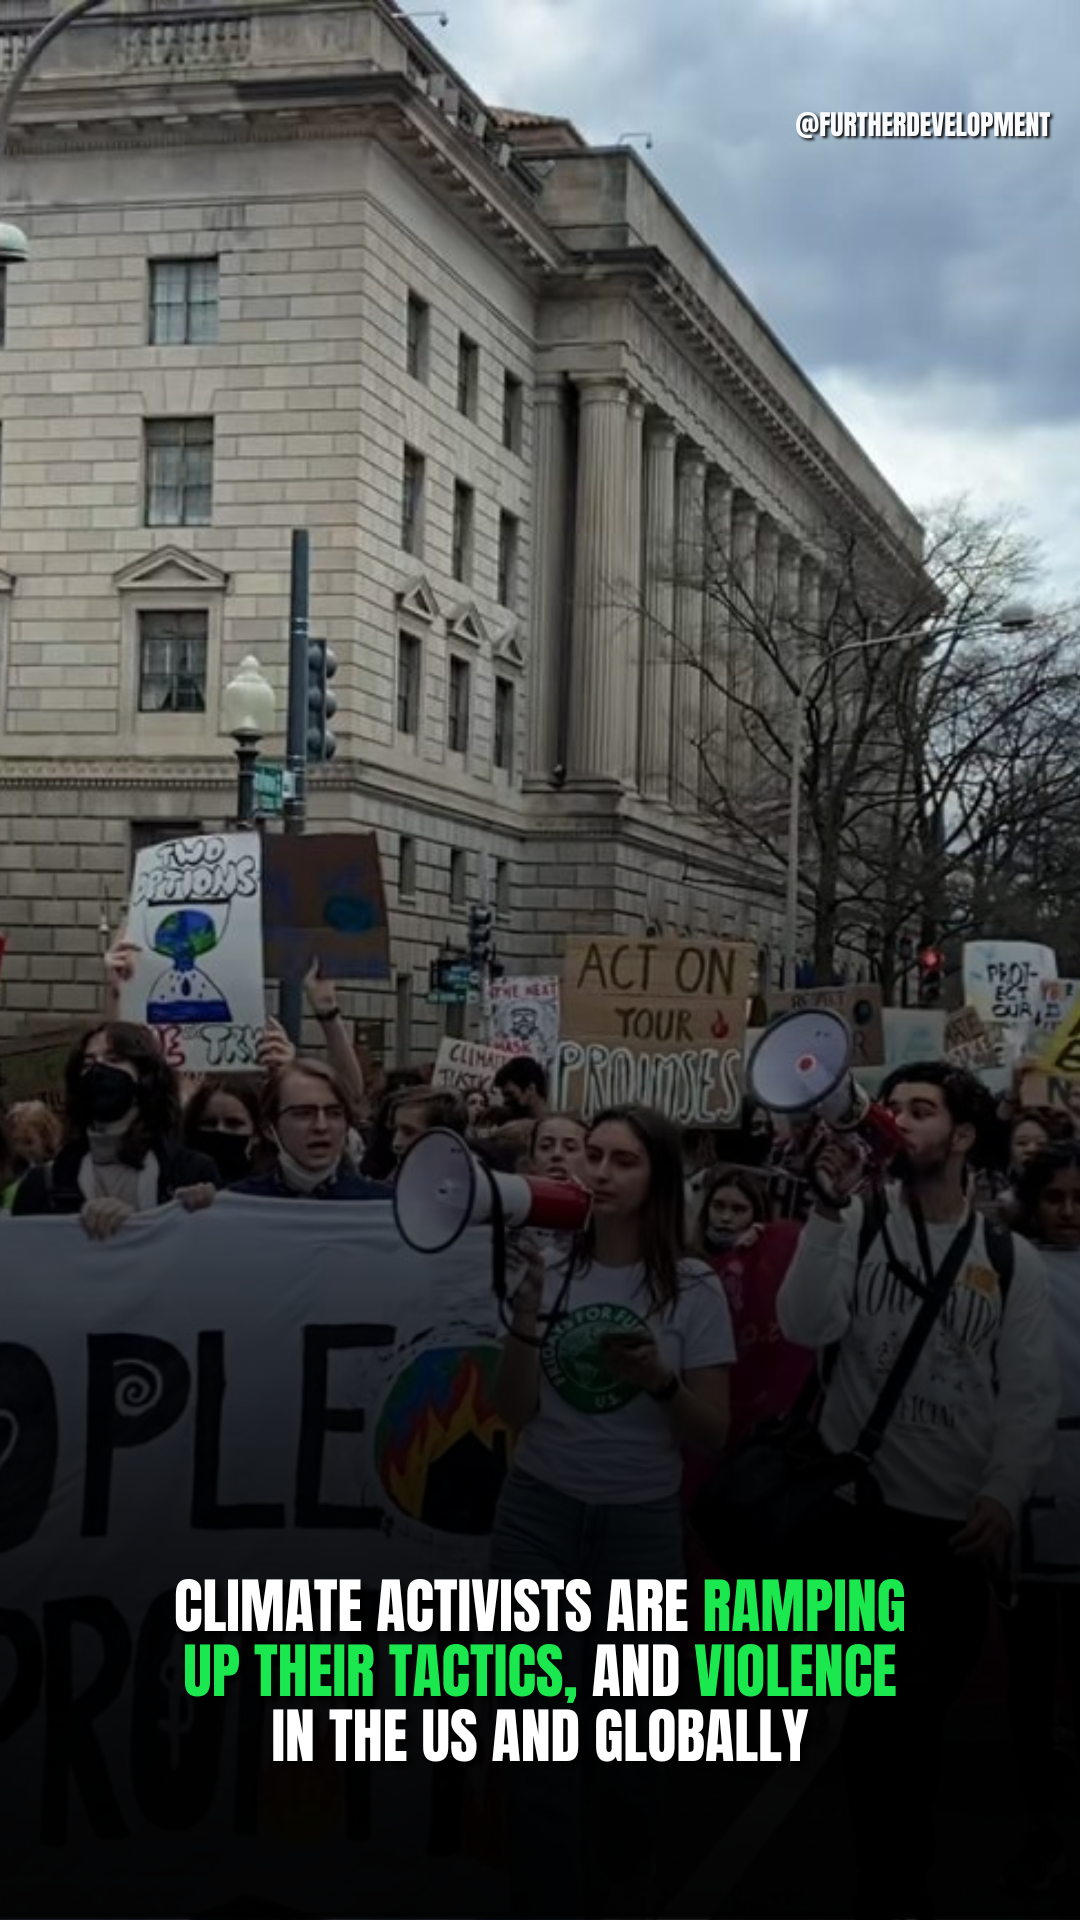 Climate activists are ramping up their tactics, and violence in the US and globally